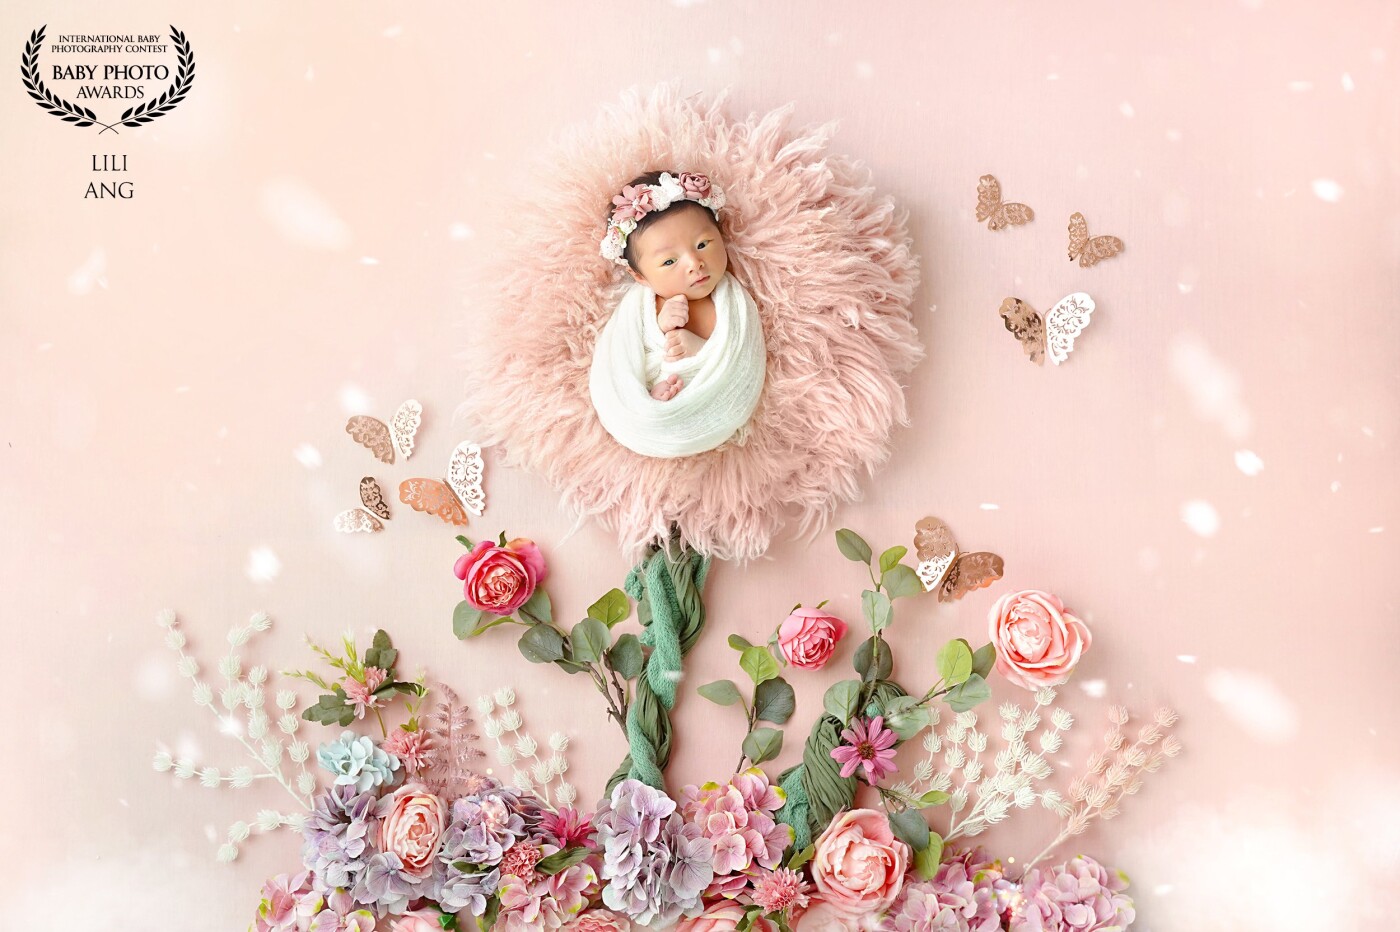 Flowers are girl's best friend.<br />
This picture show the baby as the main flower, and the butterflies know she is the beautiful one.<br />
so they are flying around her :)